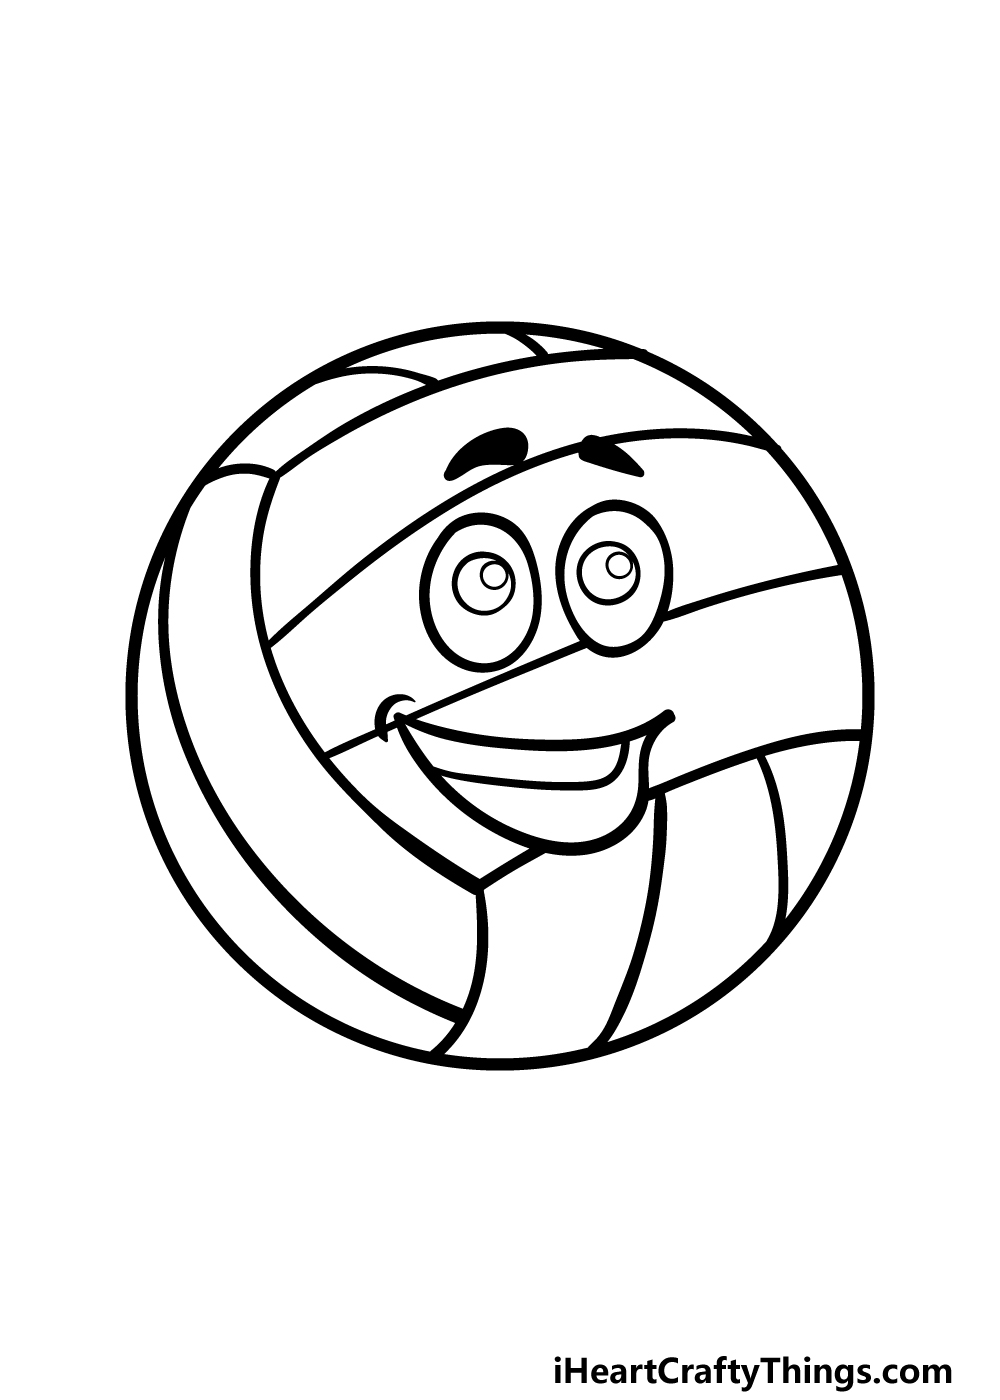 how to draw a cartoon volleyball step 6